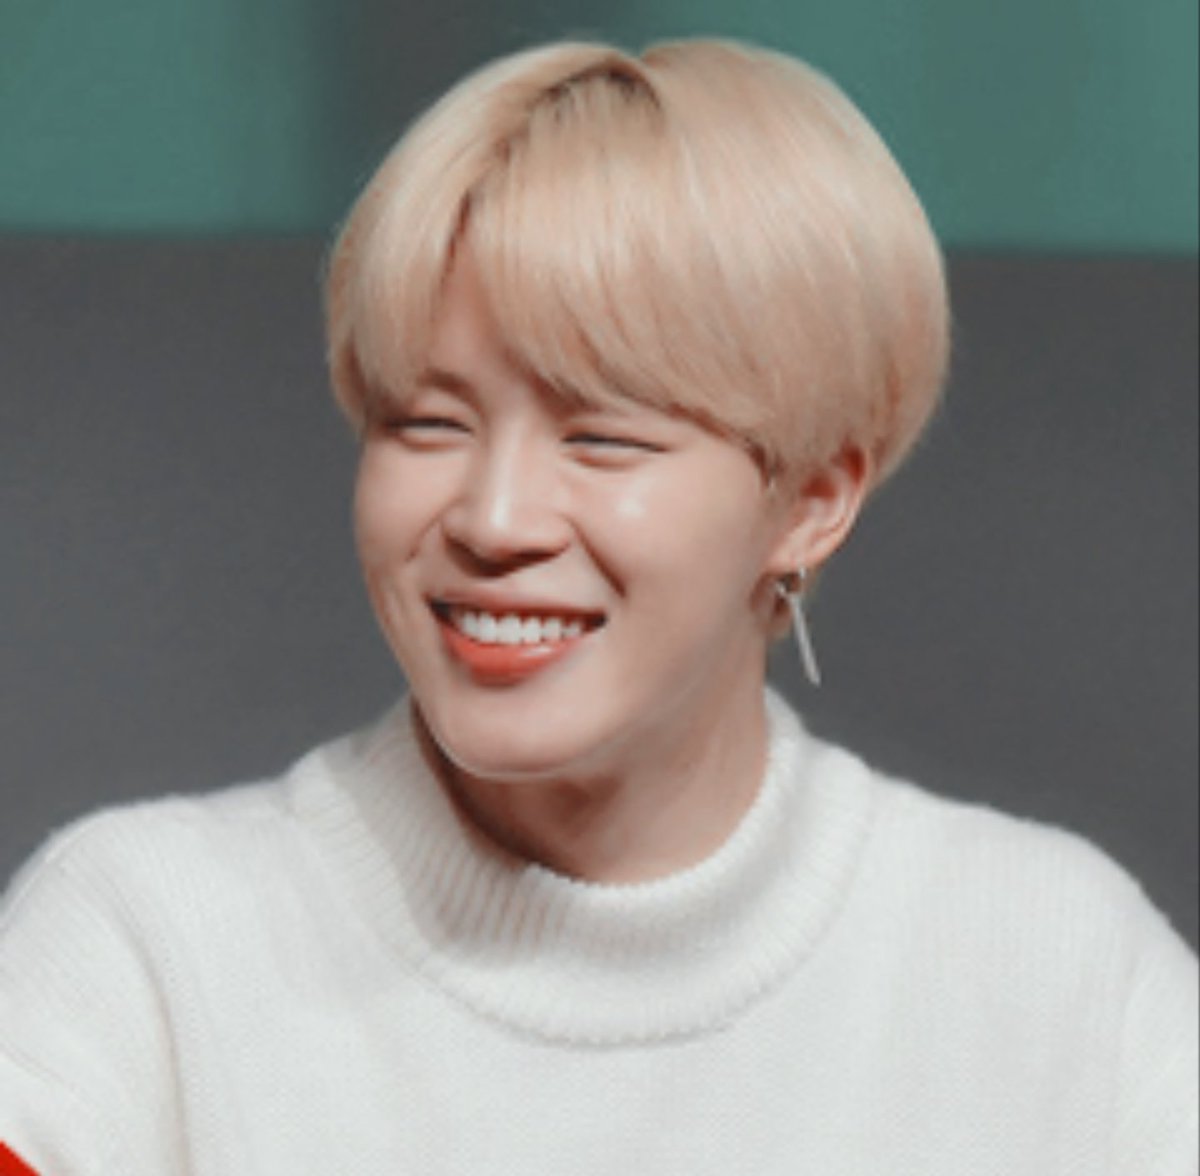 Jimin reaching the epitome of happiness - a thread that'll break your uwu machines. 